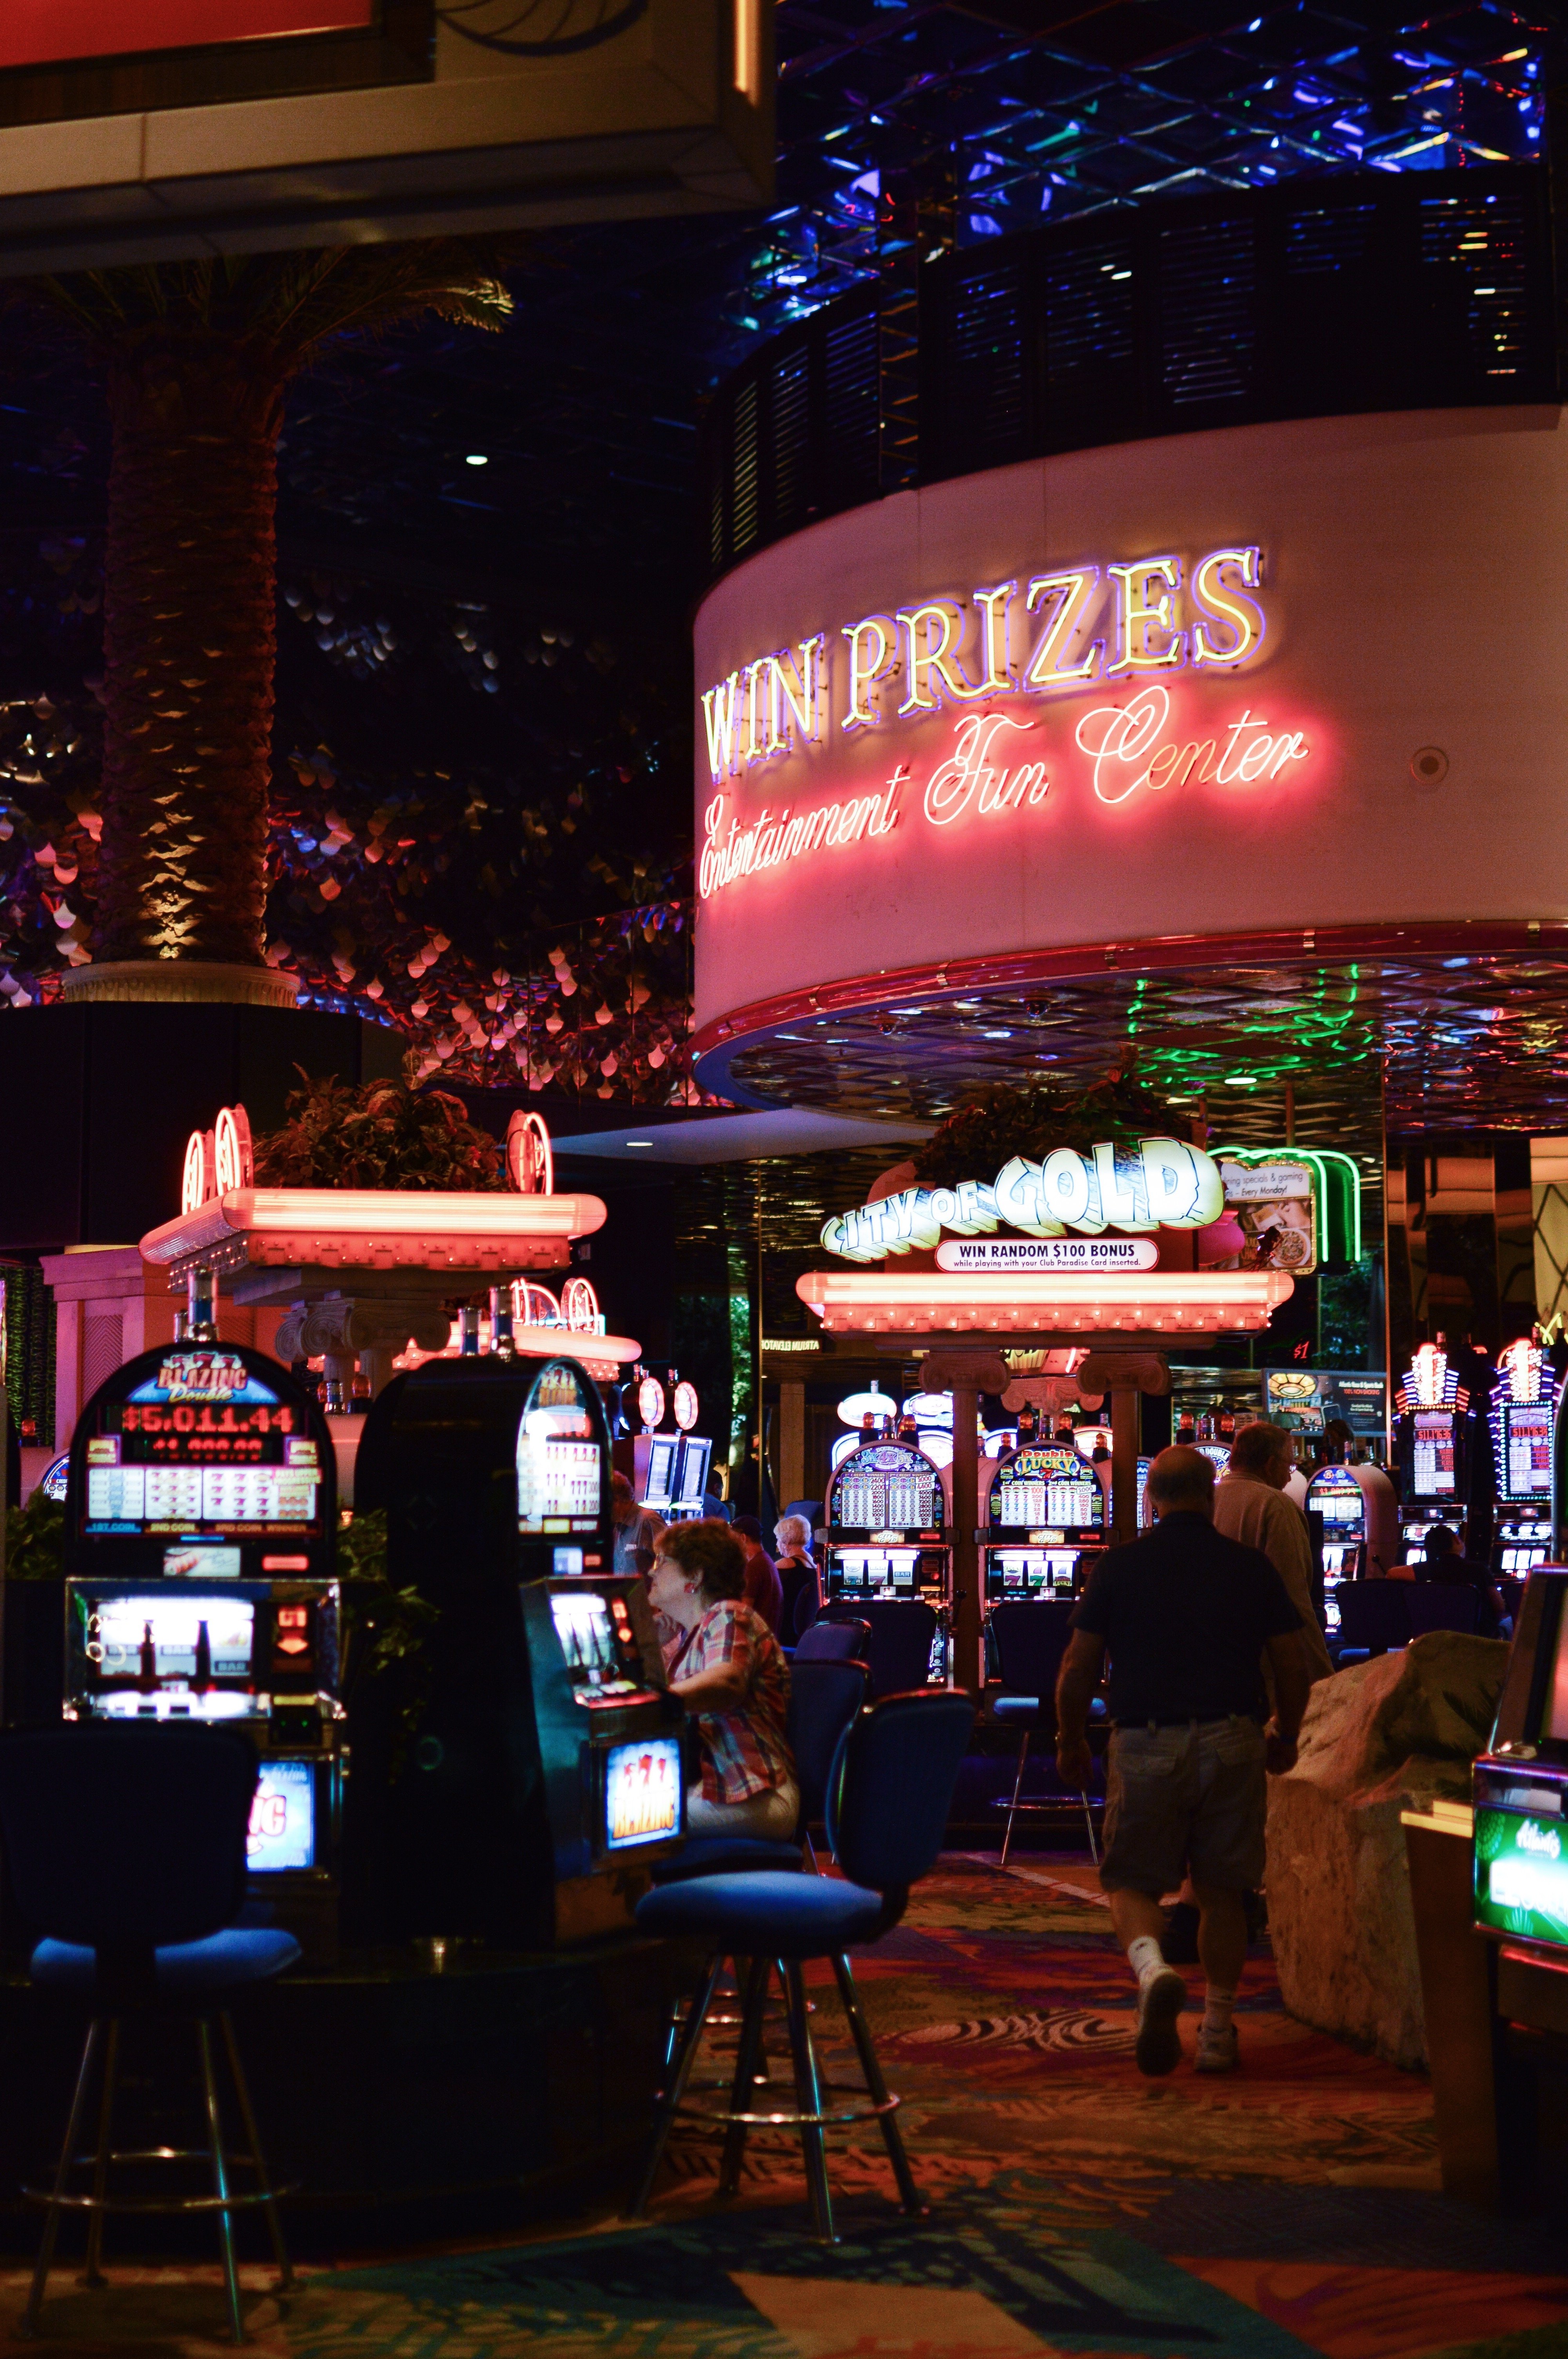 Spend a weekend in Reno's Atlantis Casino with Kelsey from Blondes & Bagels!